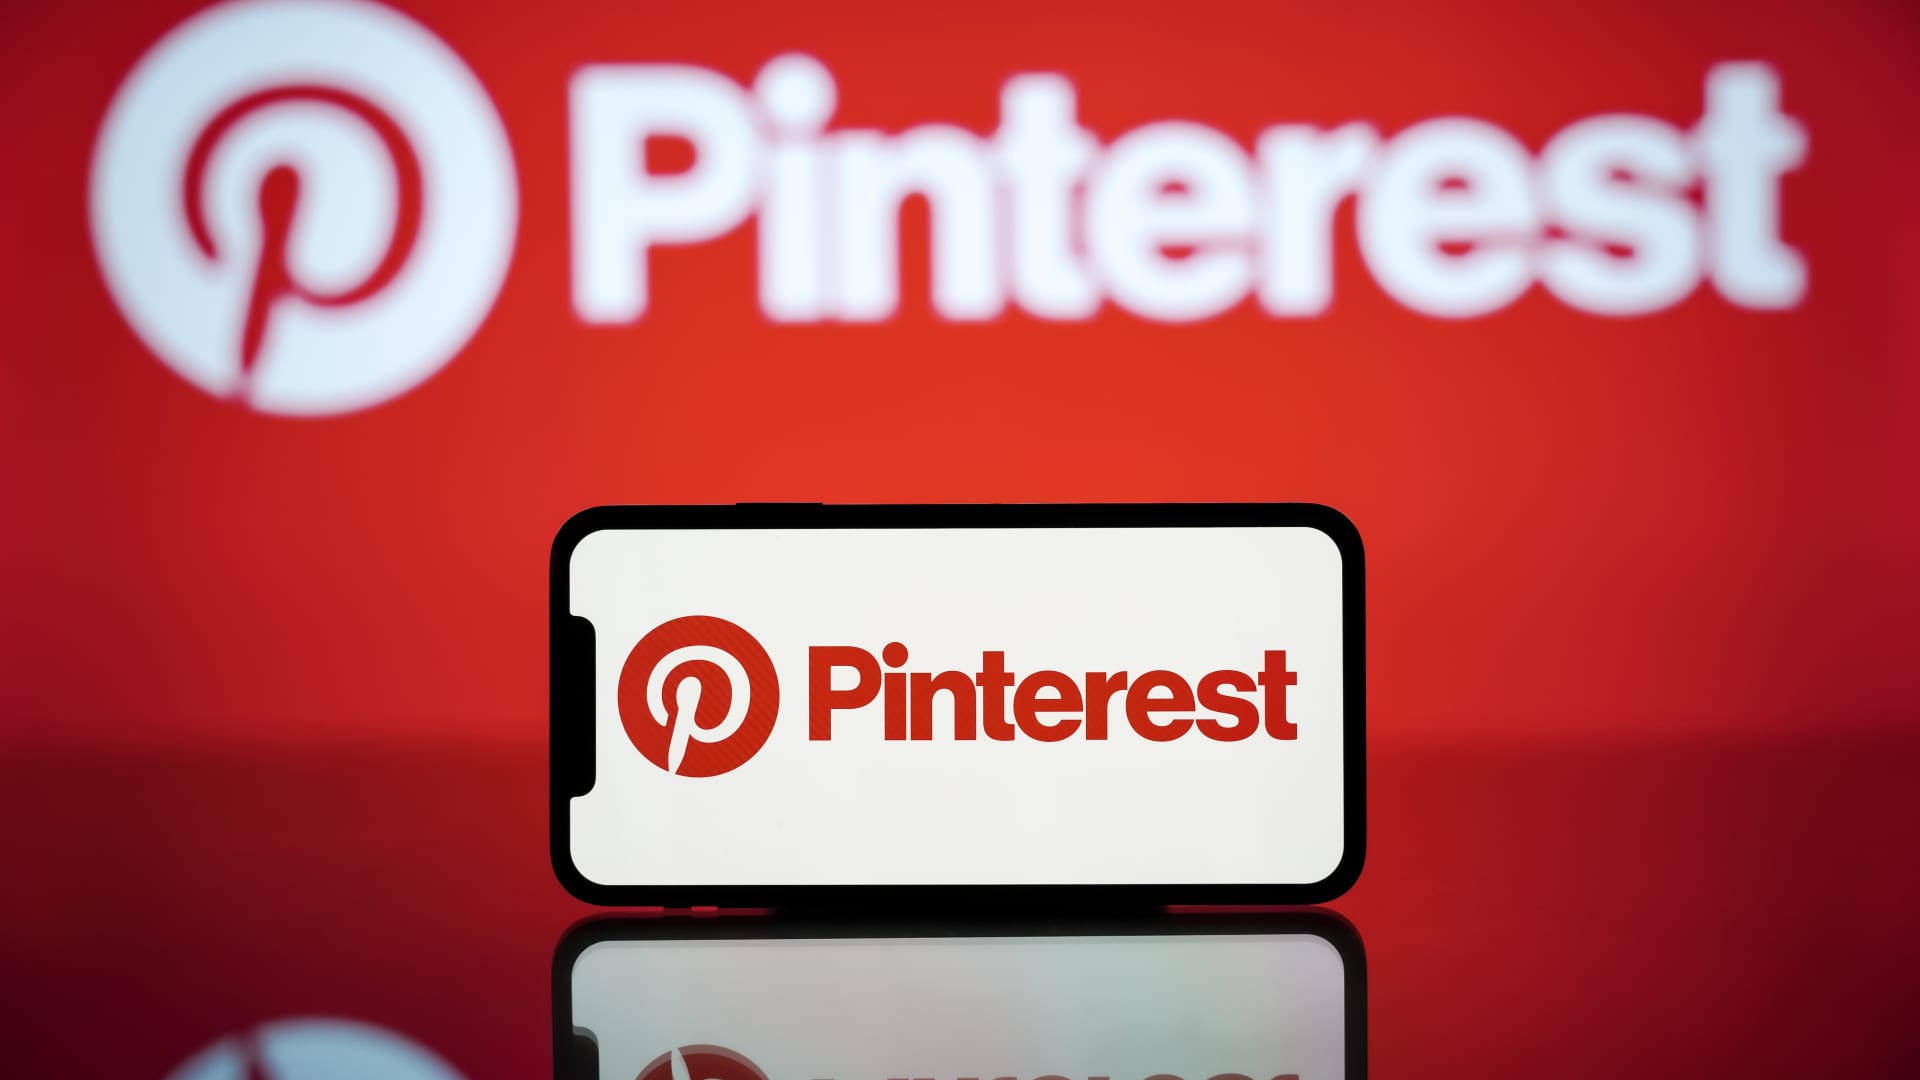 Pinterest shares soar 18% on earnings beat, strong revenue growth [Video]